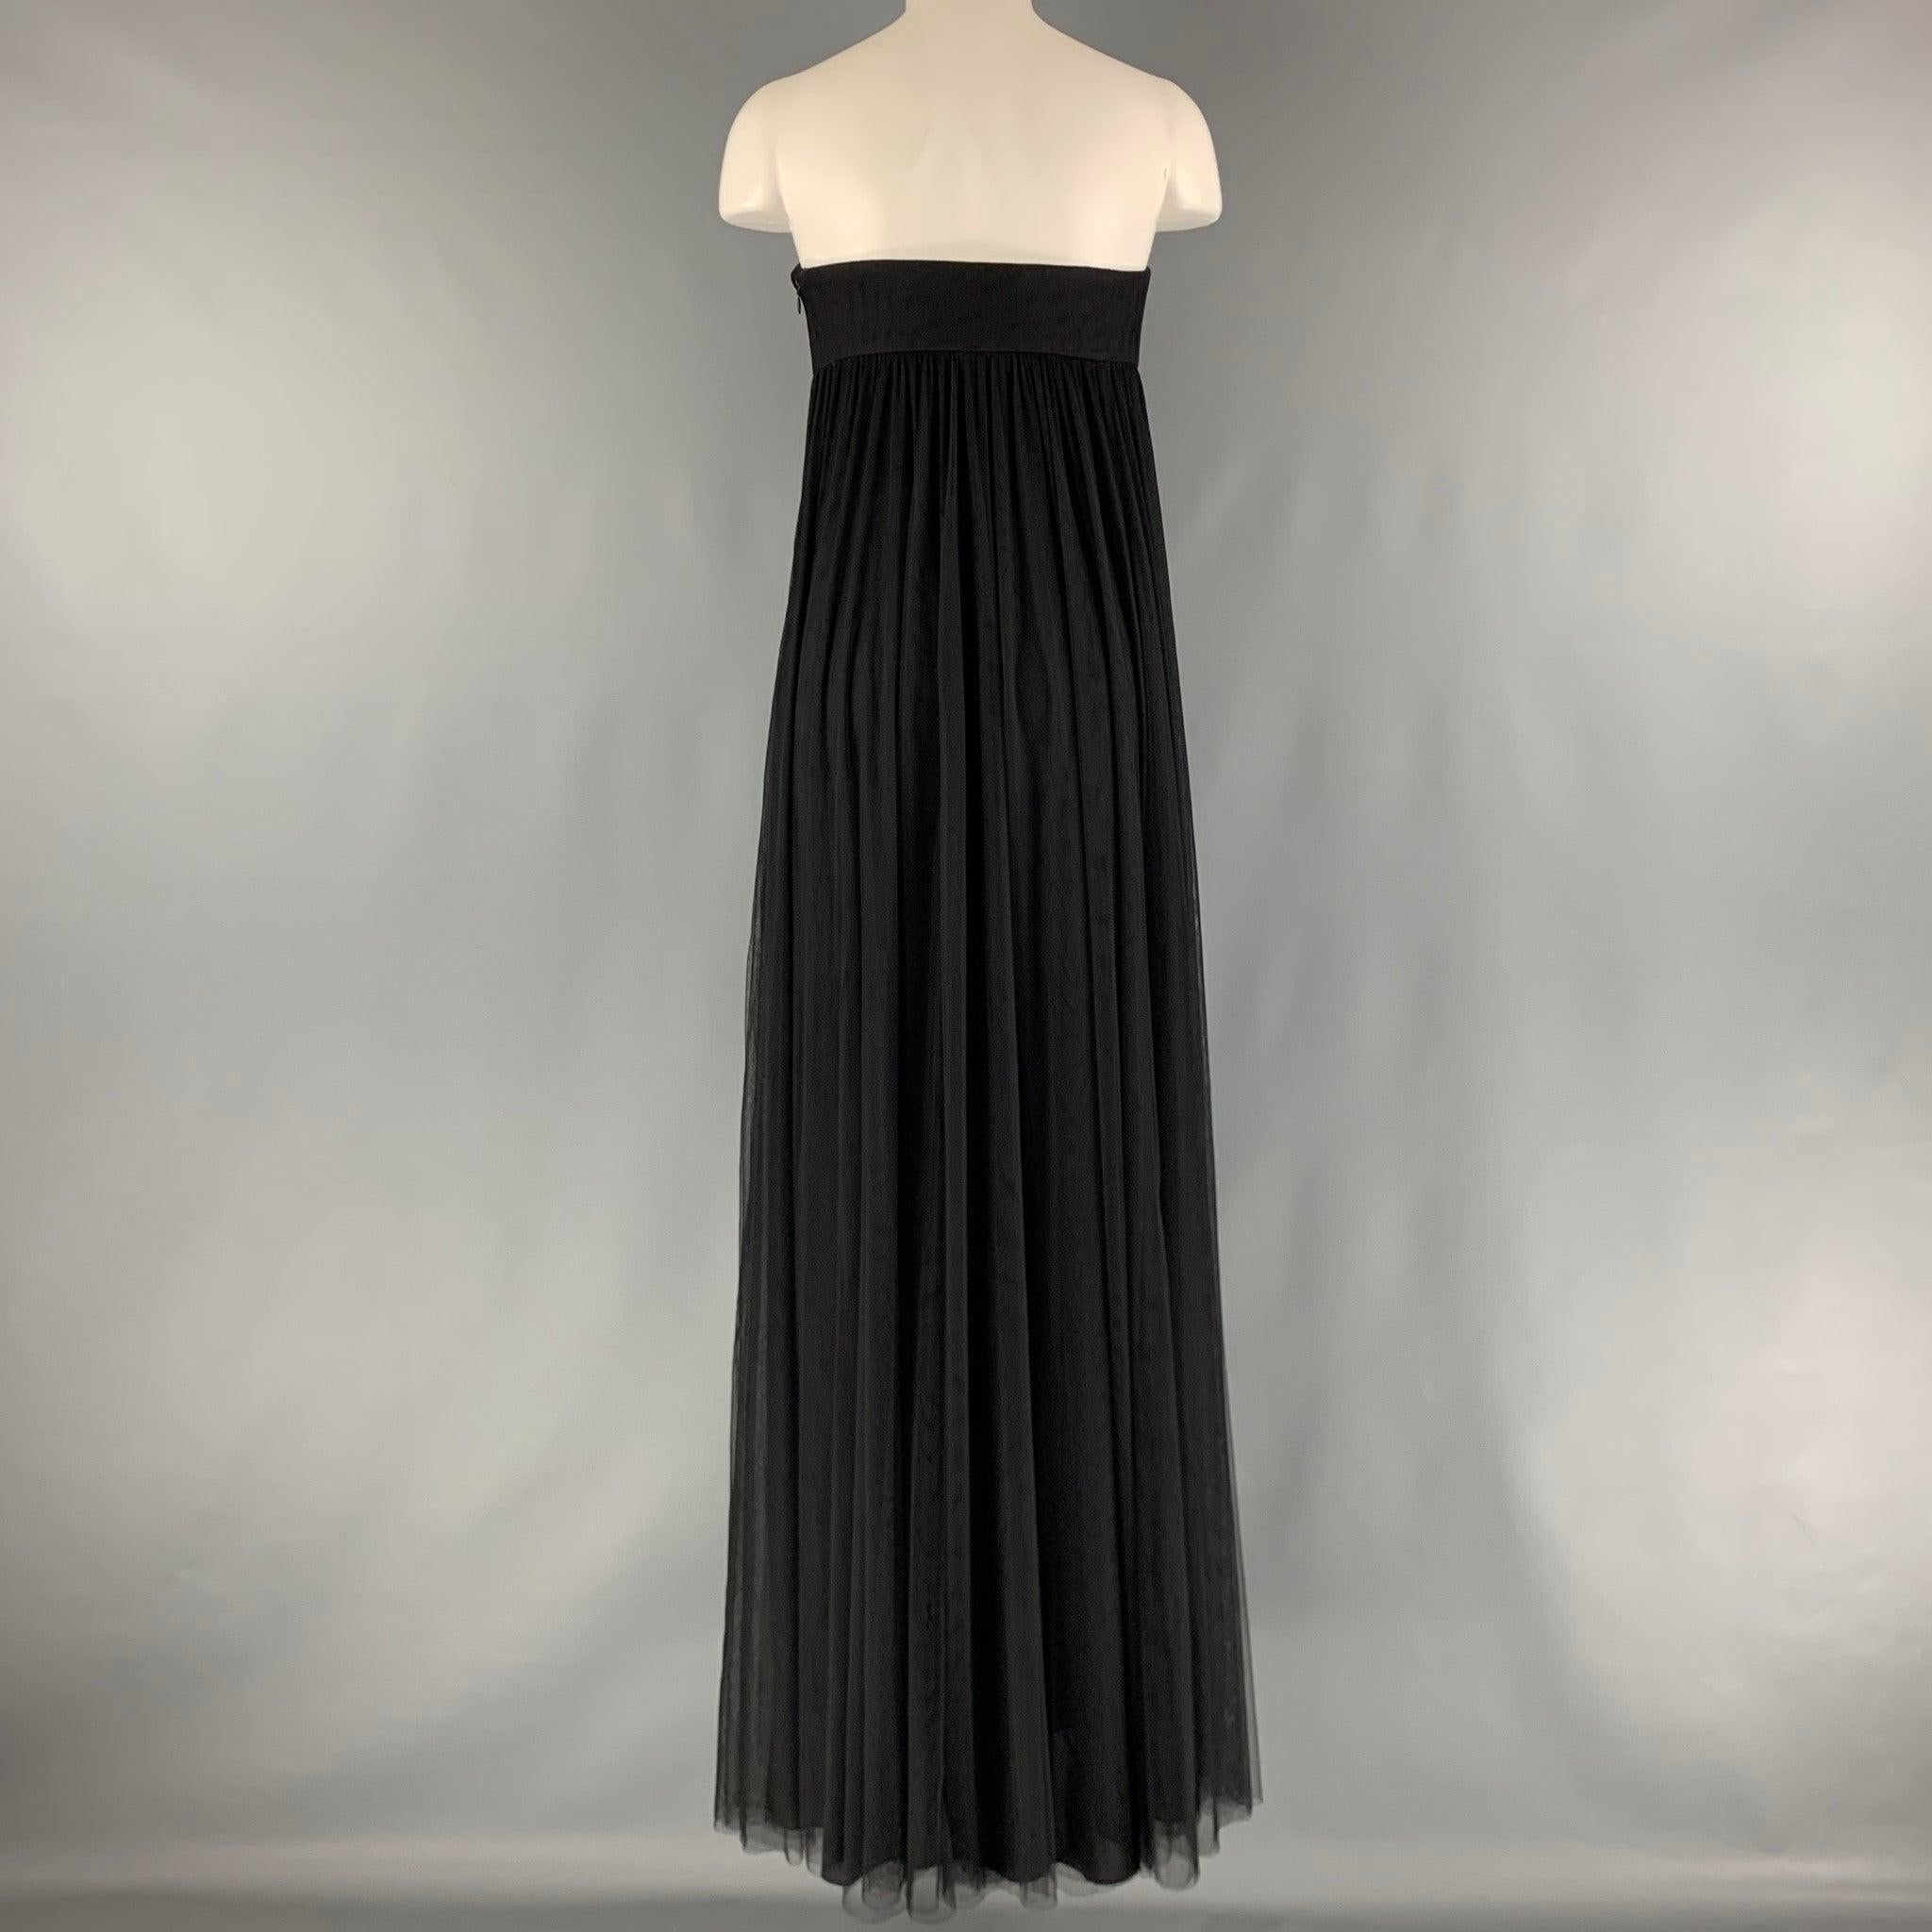 VERA WANG Size 6 Black Polyester See Through Strapless Dress In Excellent Condition For Sale In San Francisco, CA